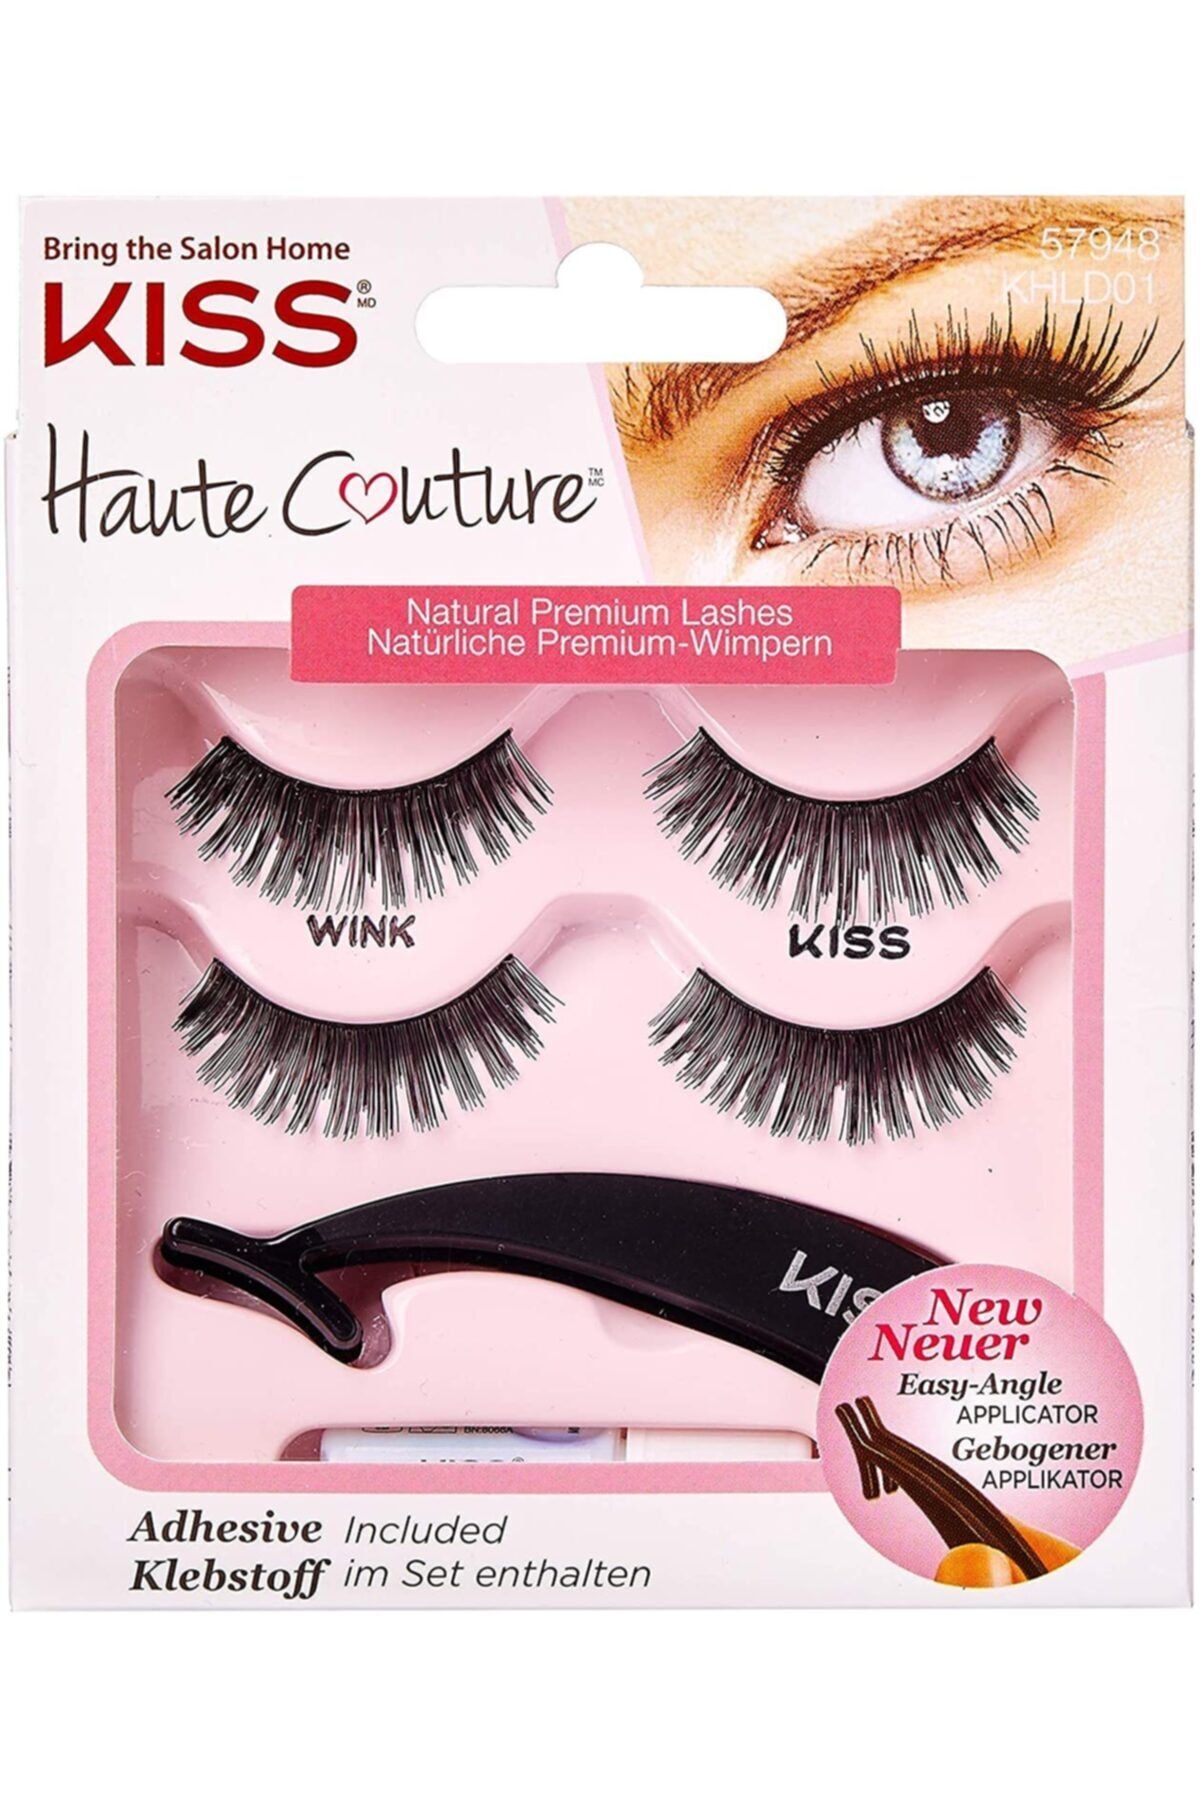 Kiss Haute Couture Duo Pack Lashes Wink